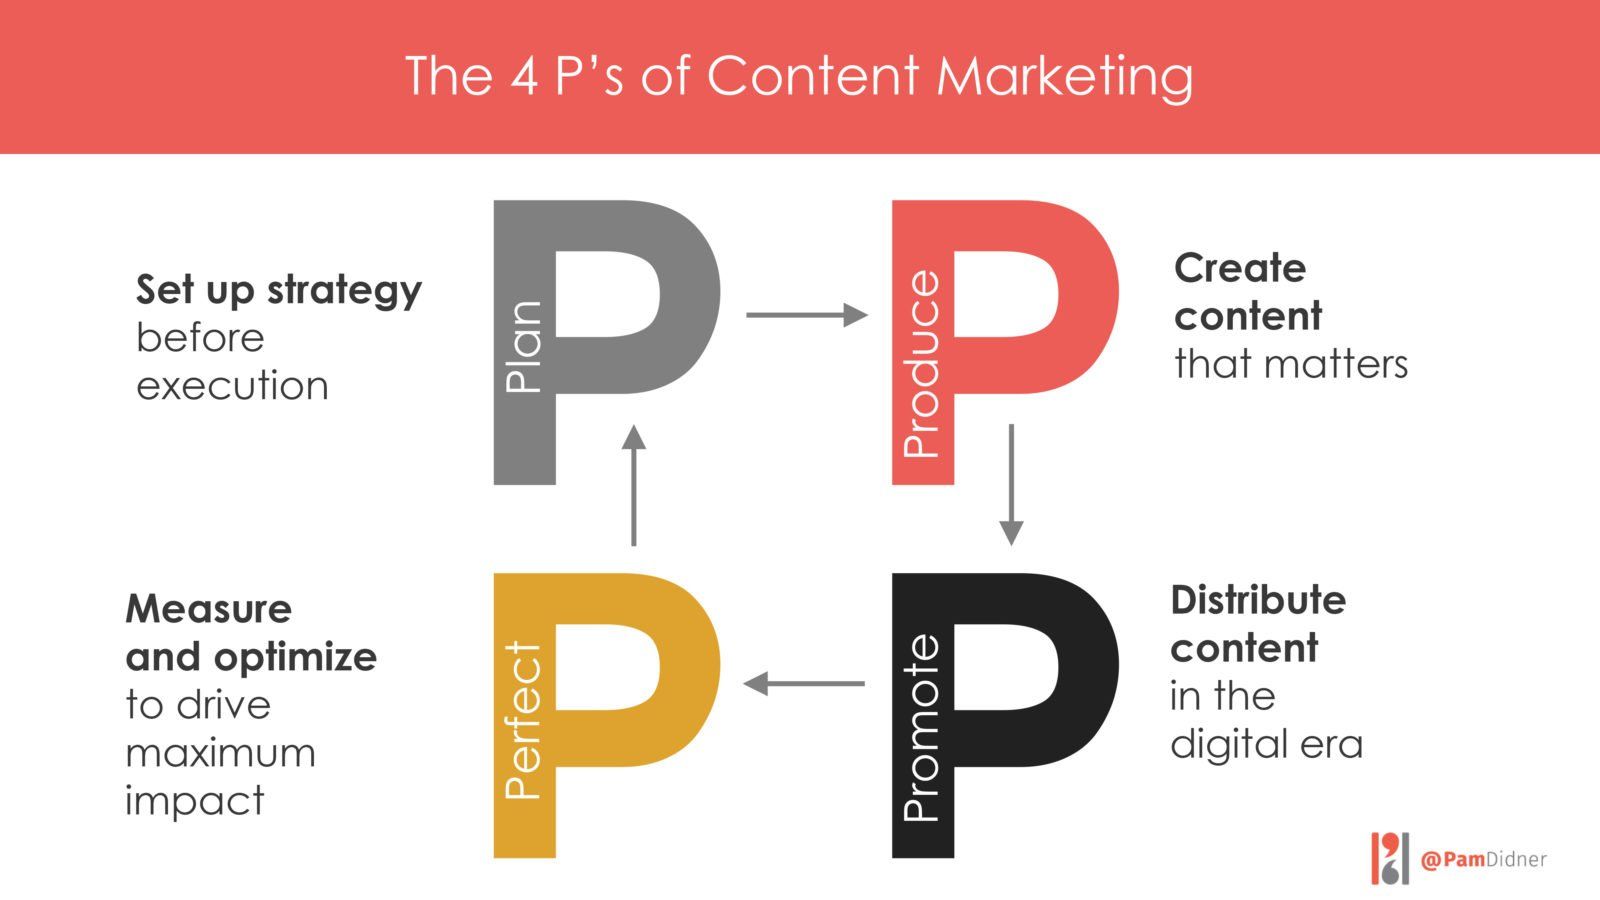 The 4 P’s of Content Marketing